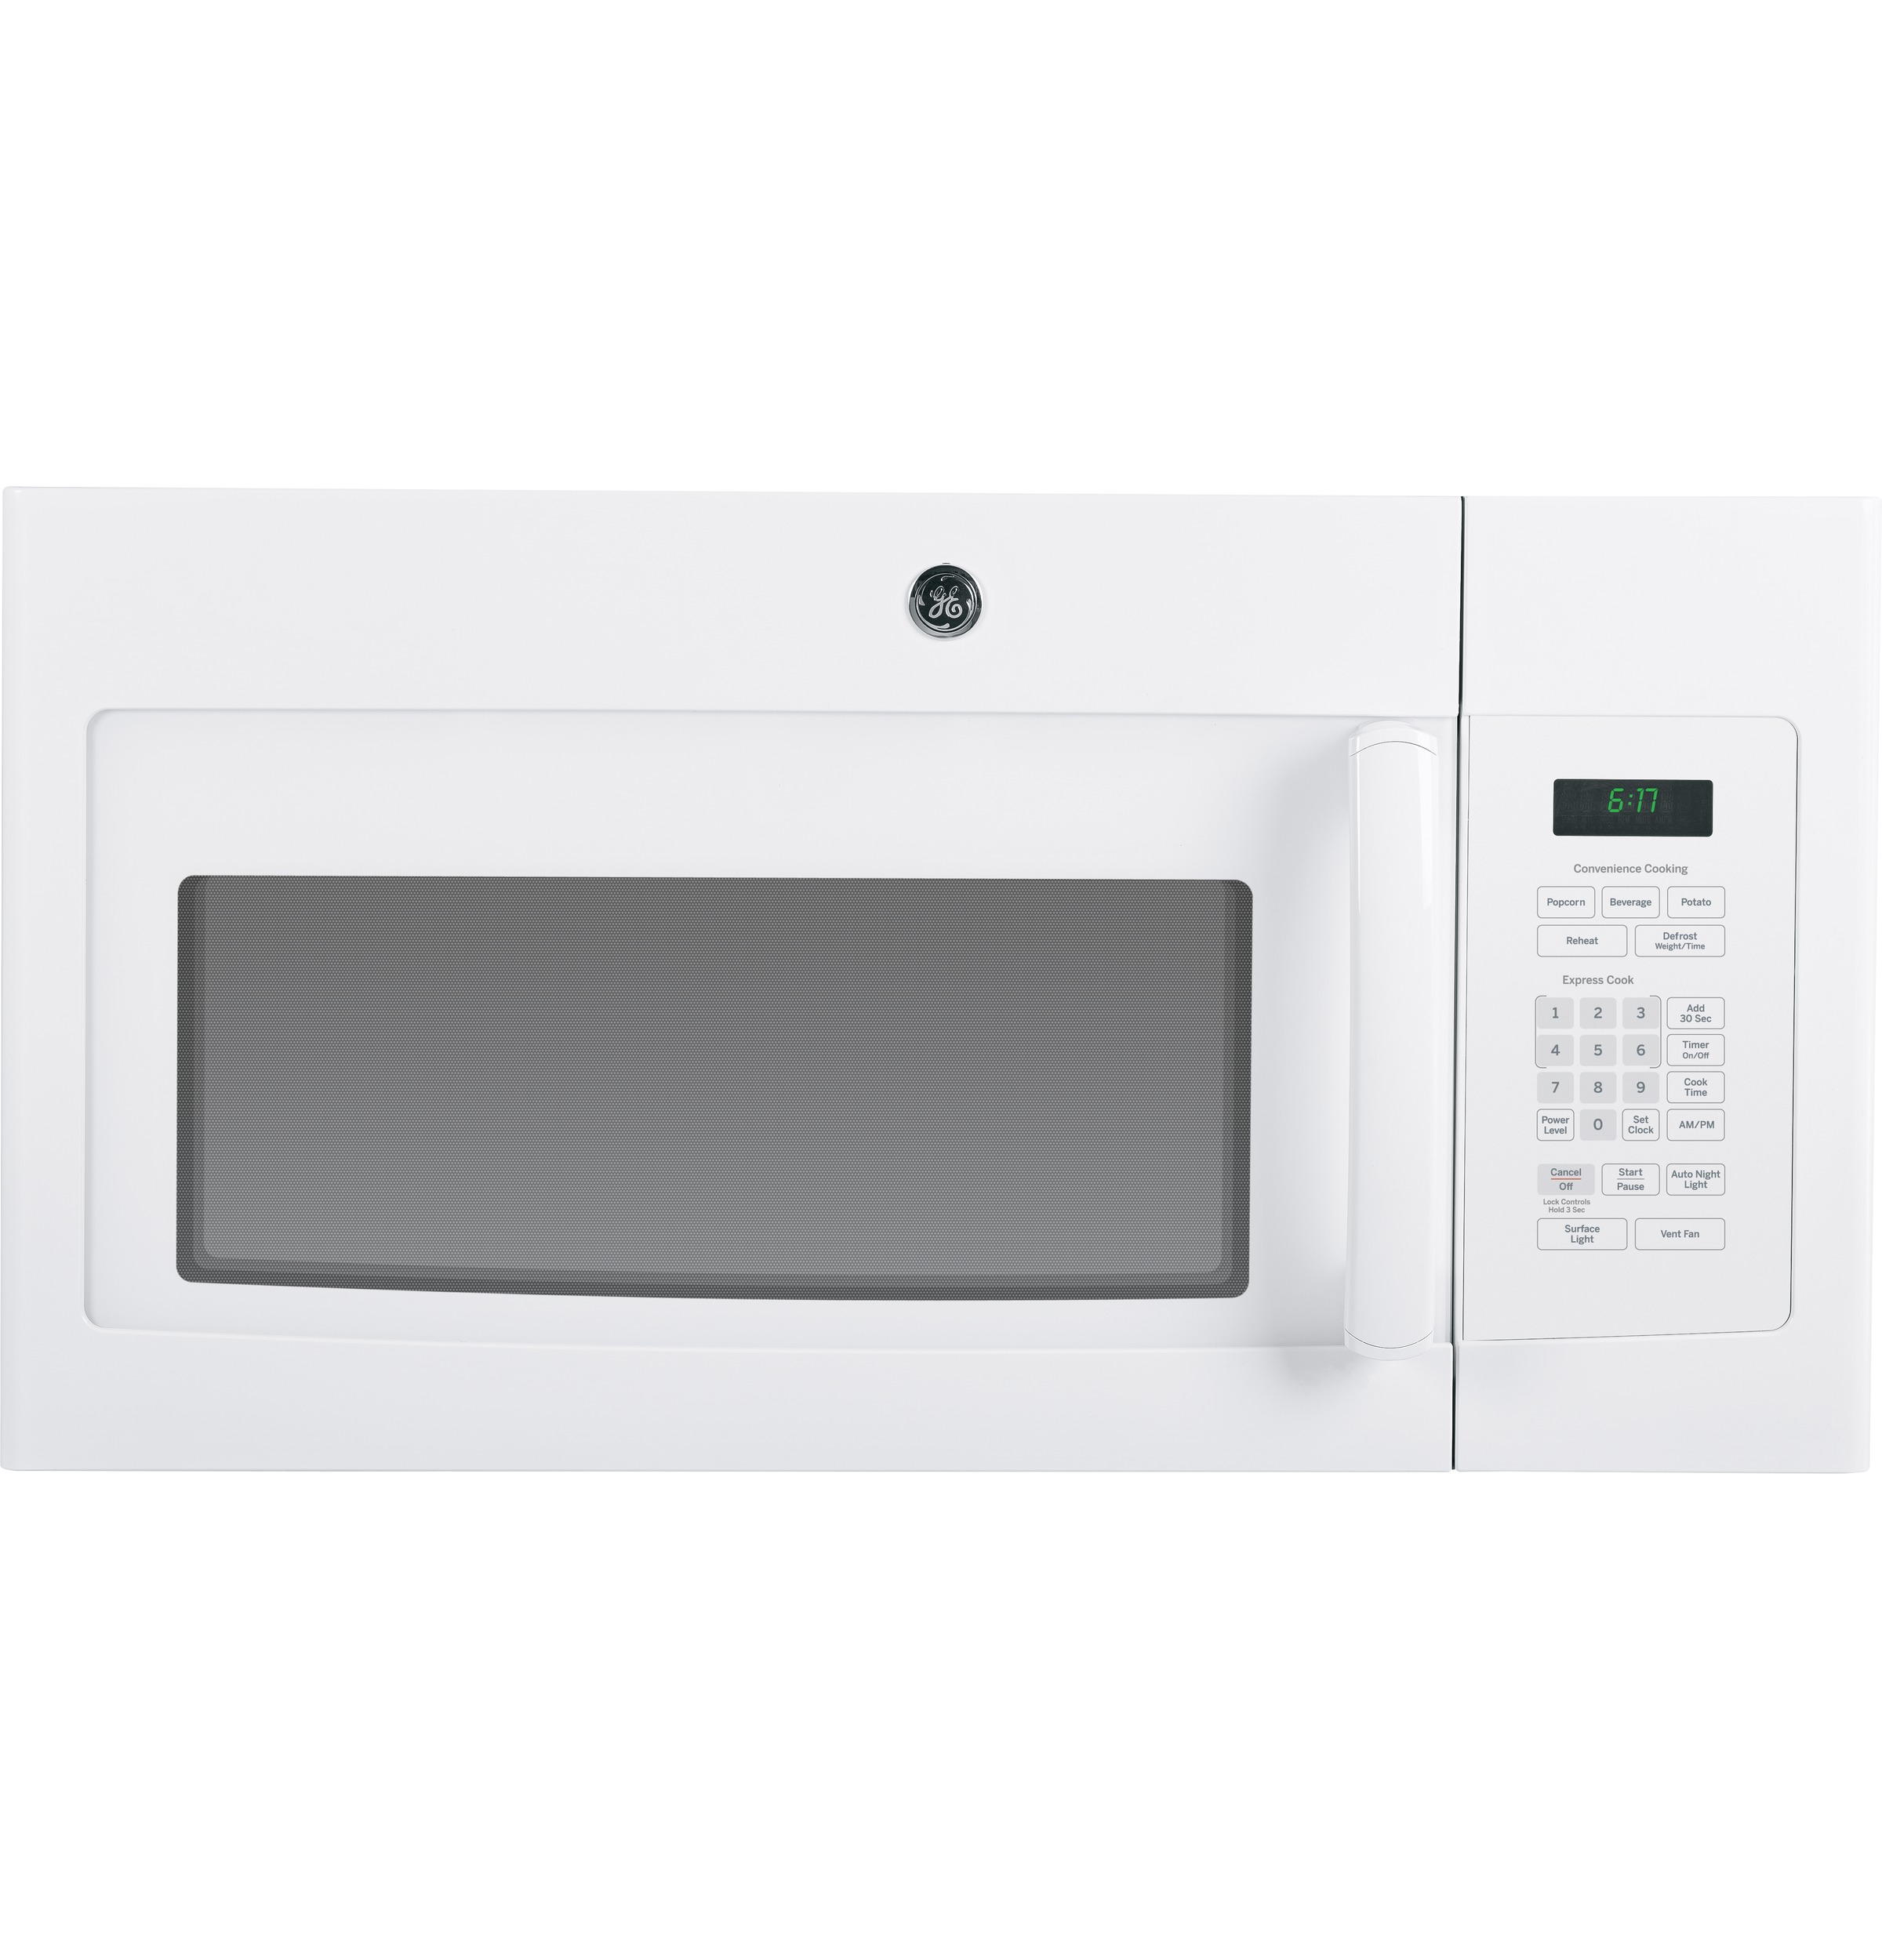 GE® 1.7 Cu. Ft. Over-the-Range Microwave Oven with Recirculating Venting